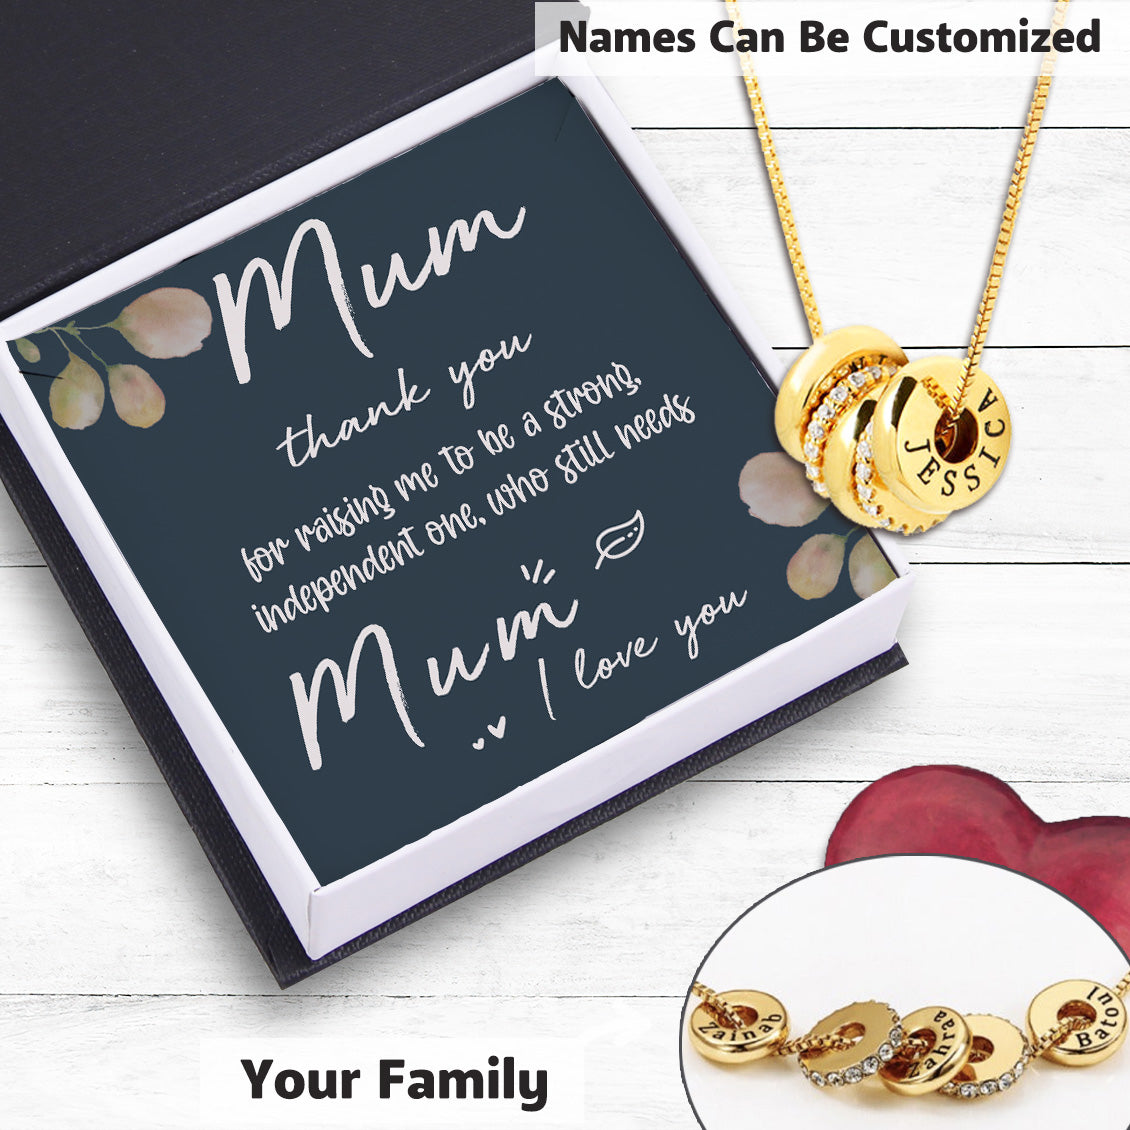 Buy Mom And Daughter Necklace Set For 2 Heart Stainless Steel Cheap  Personalised